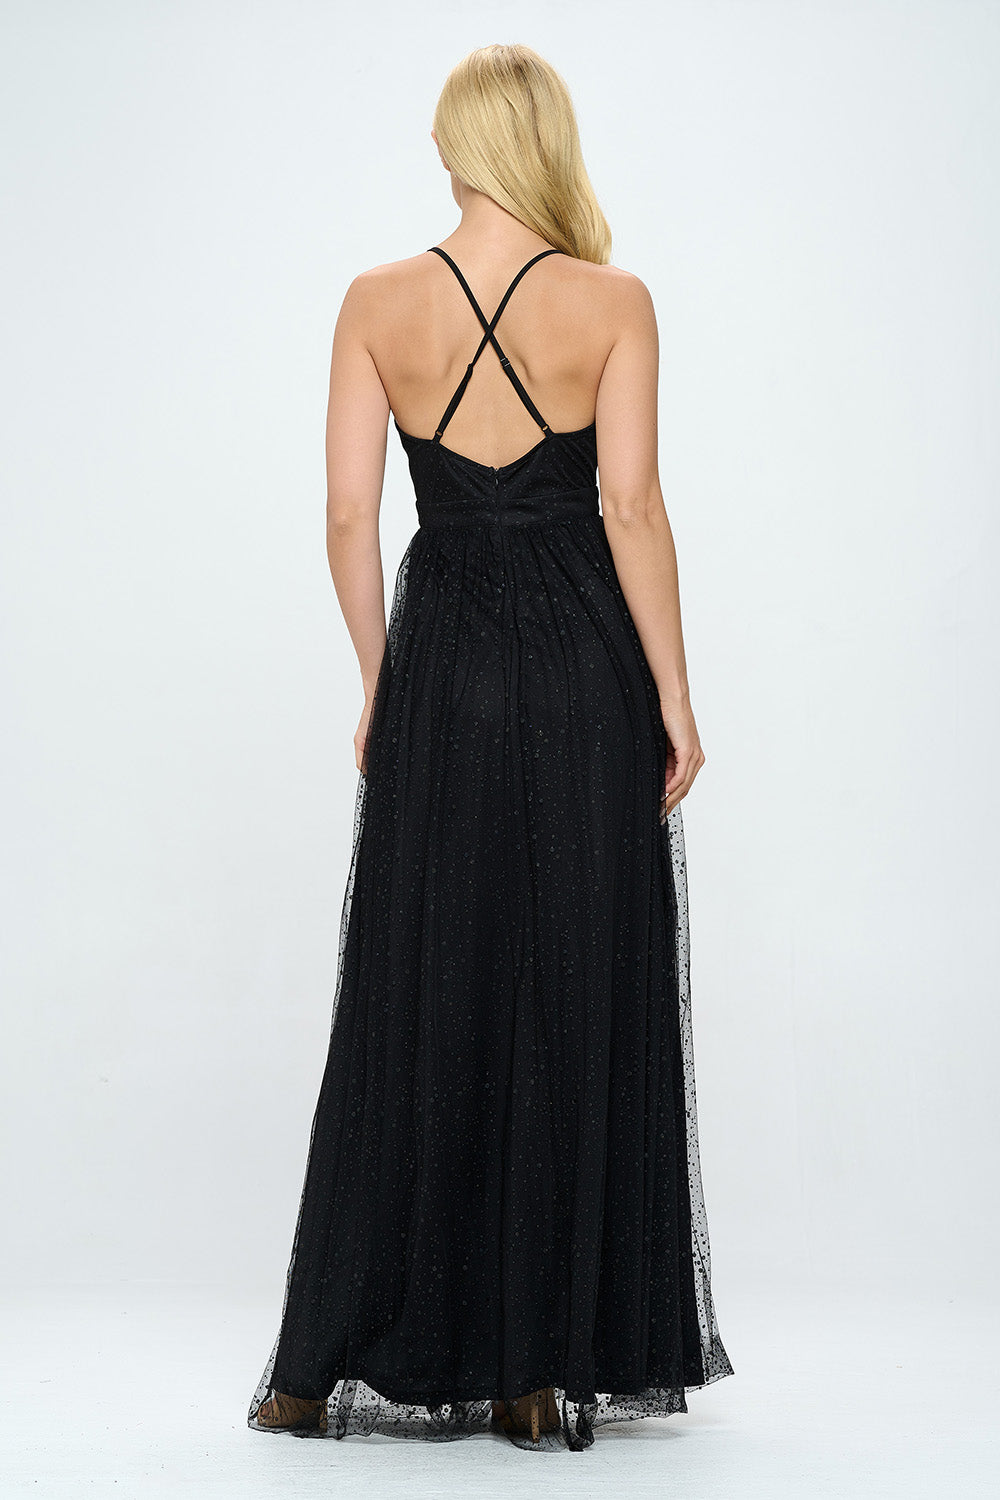 PLUNGING NECKLINE LAYERED GLITTER TULLE MAXI DRESS